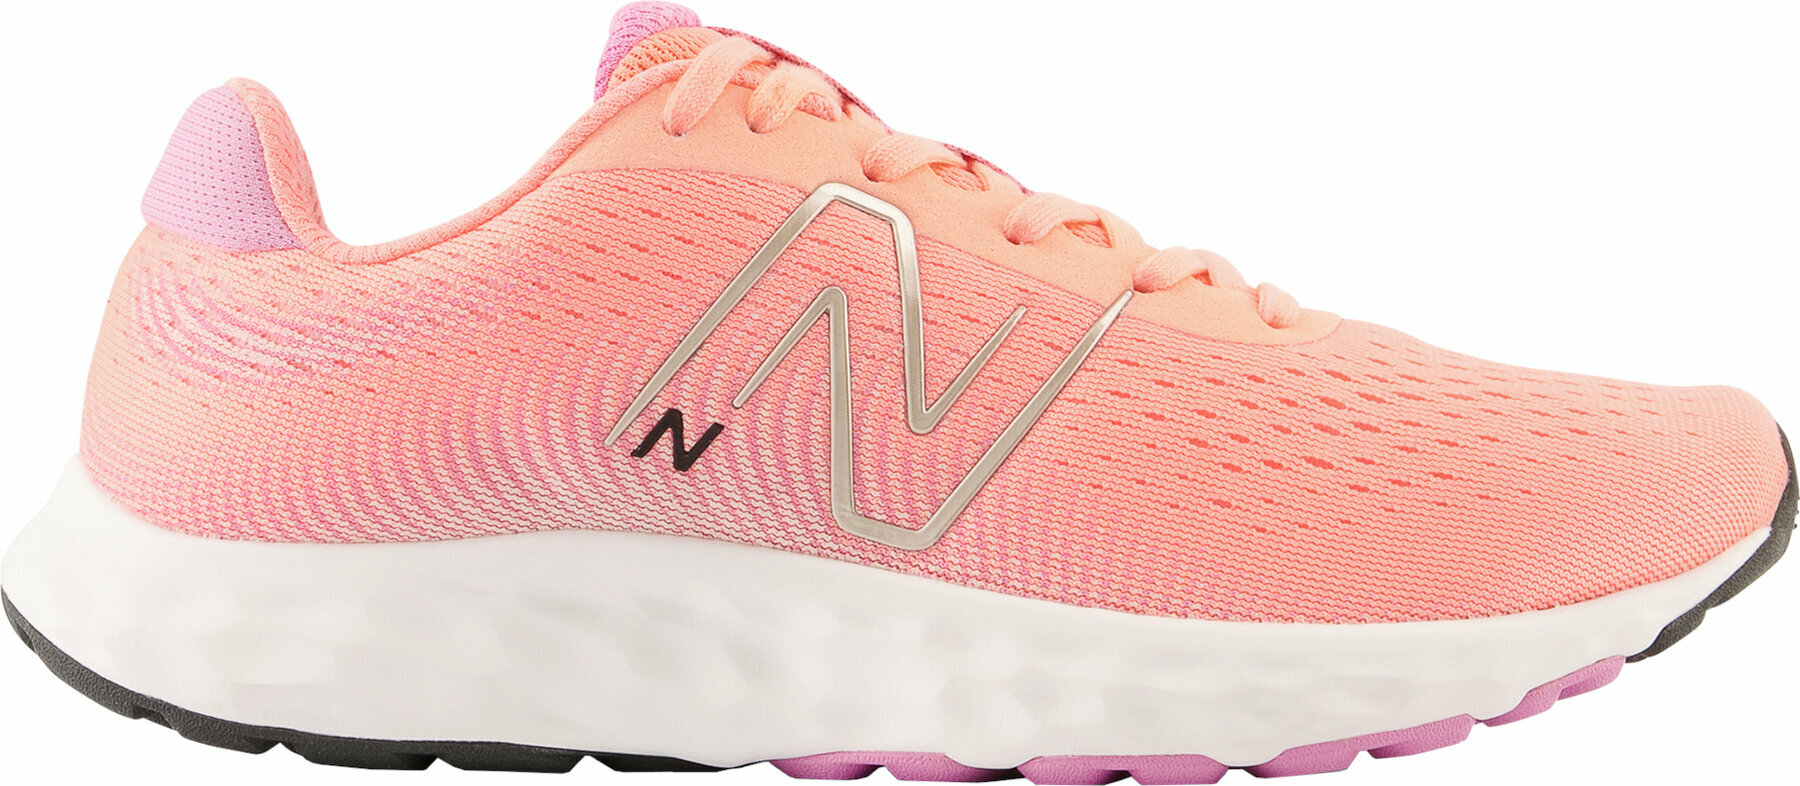 Road running shoes
 New Balance Womens W520 Pink 40 Road running shoes